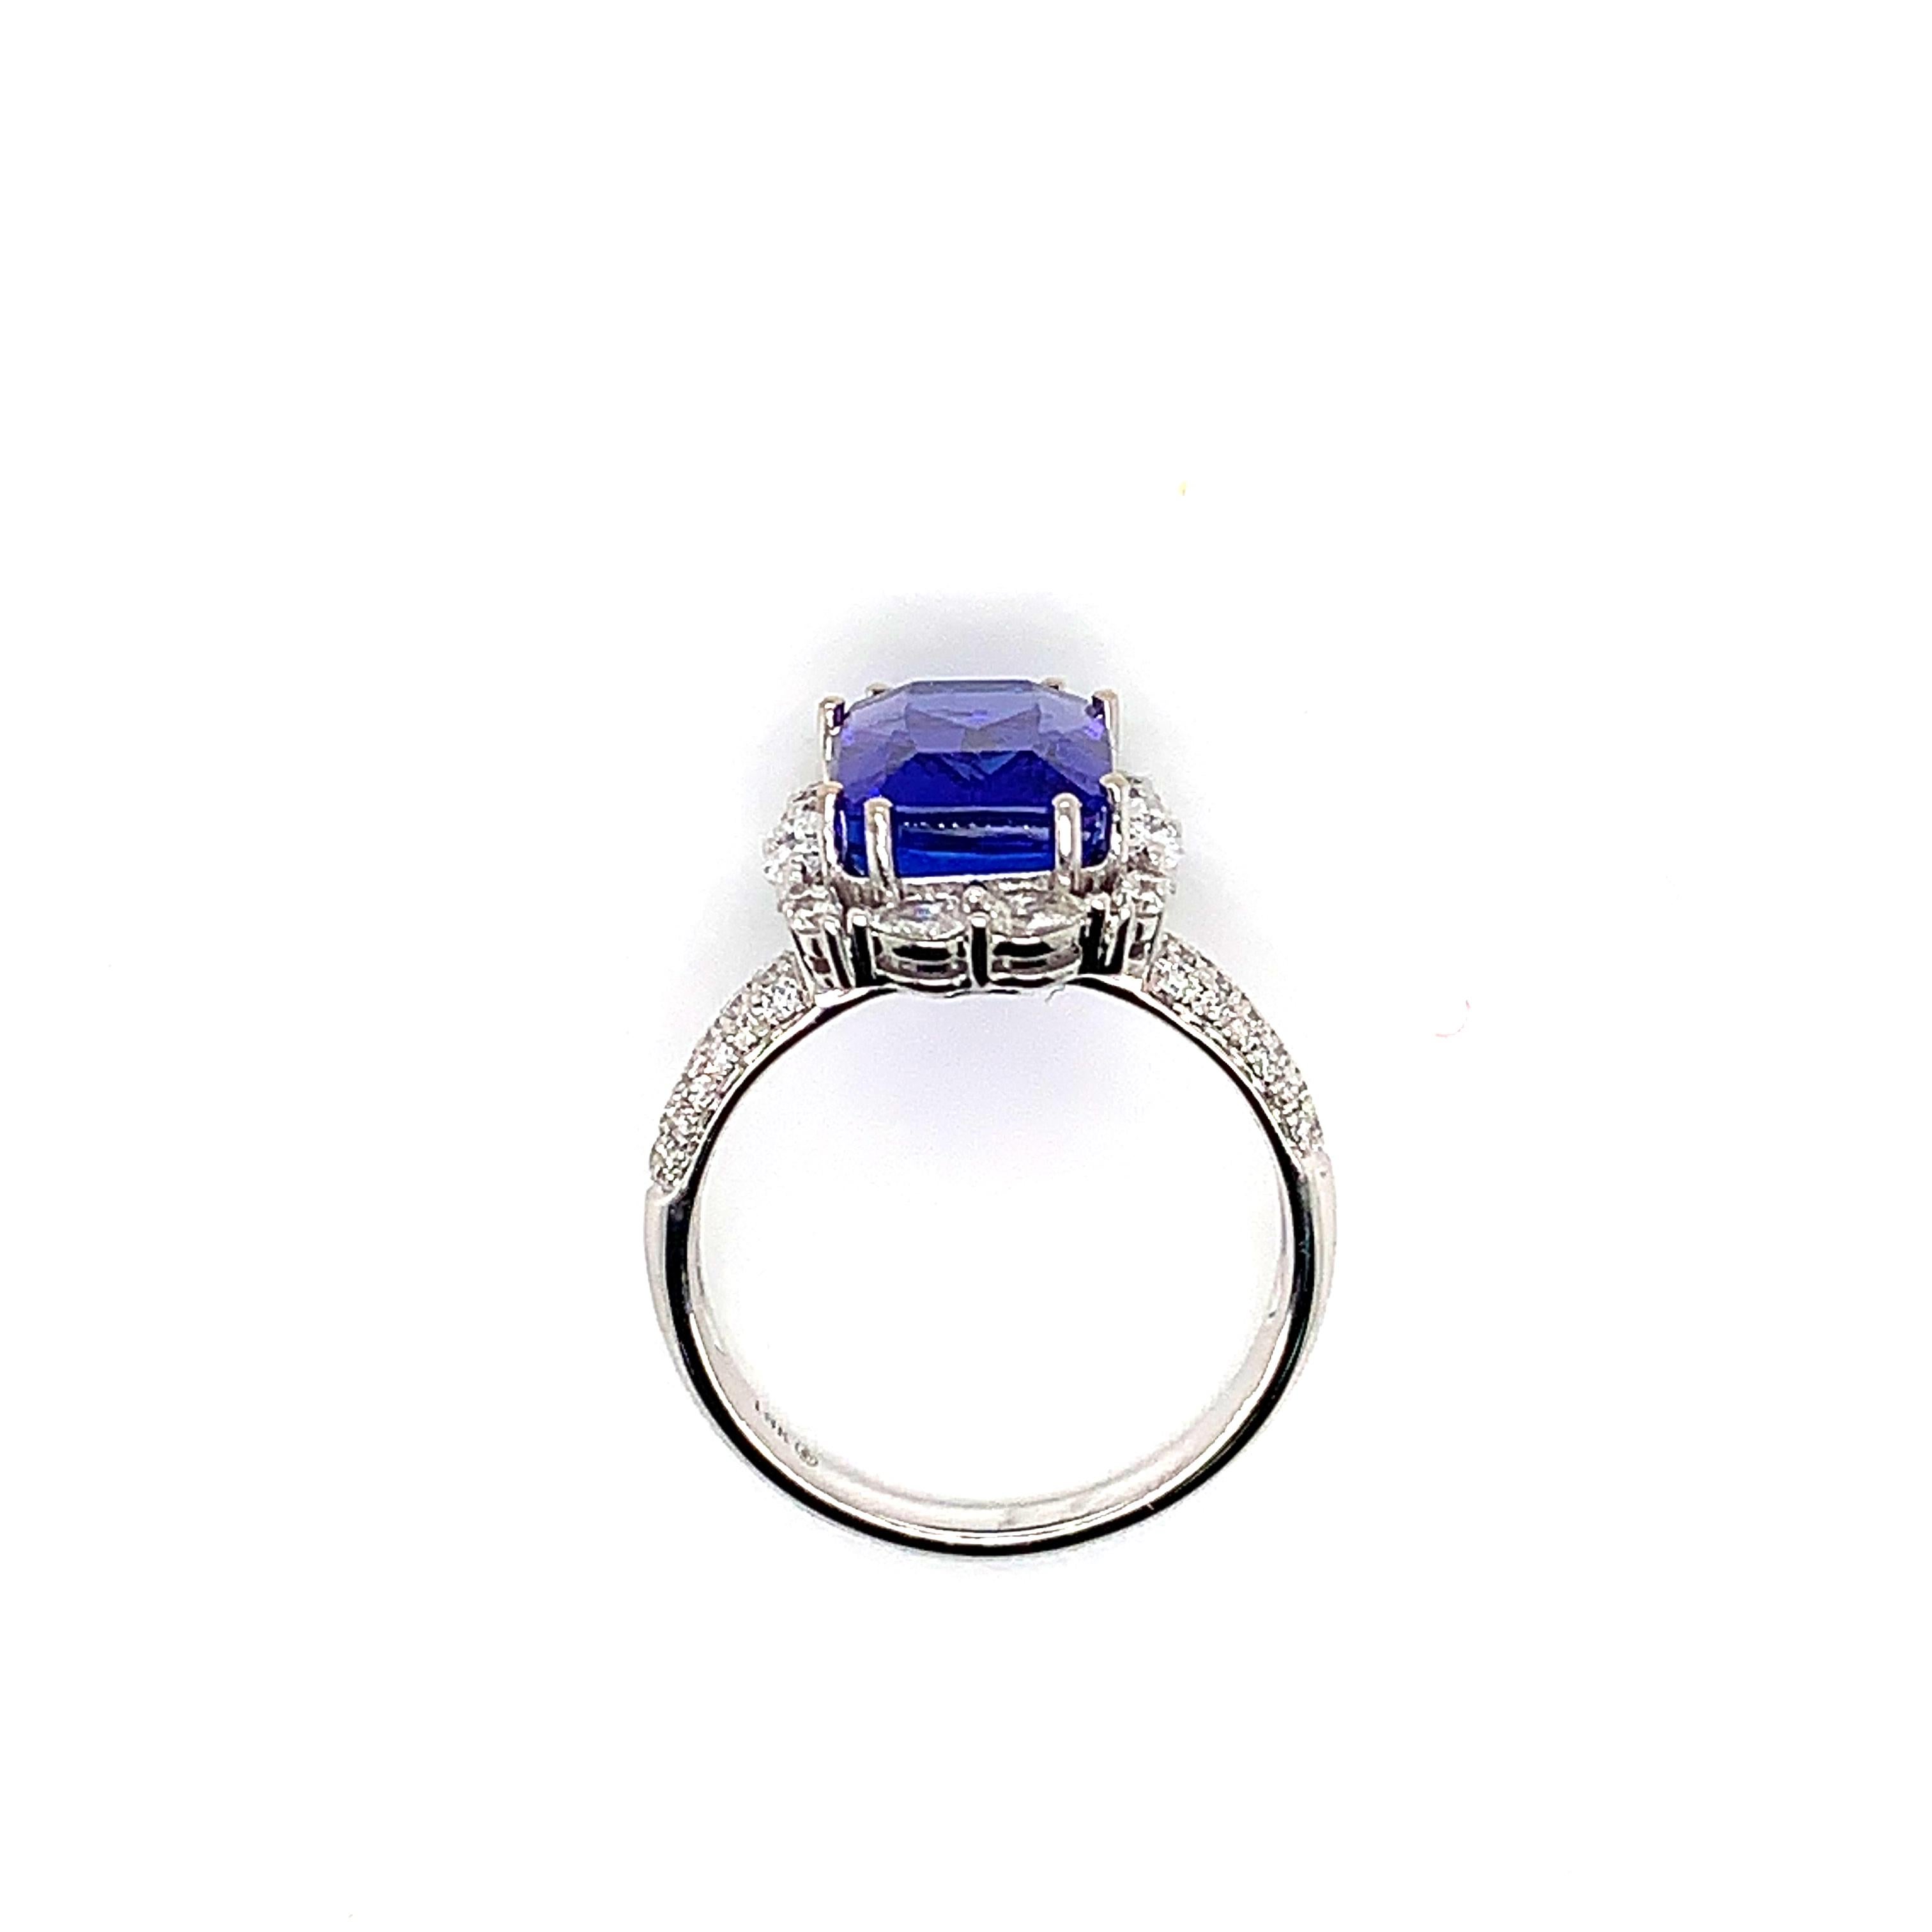 6.014 Carat Cushion Shaped Tanzanite Ring in 18 Karat White Gold with Diamonds In New Condition For Sale In Hong Kong, HK